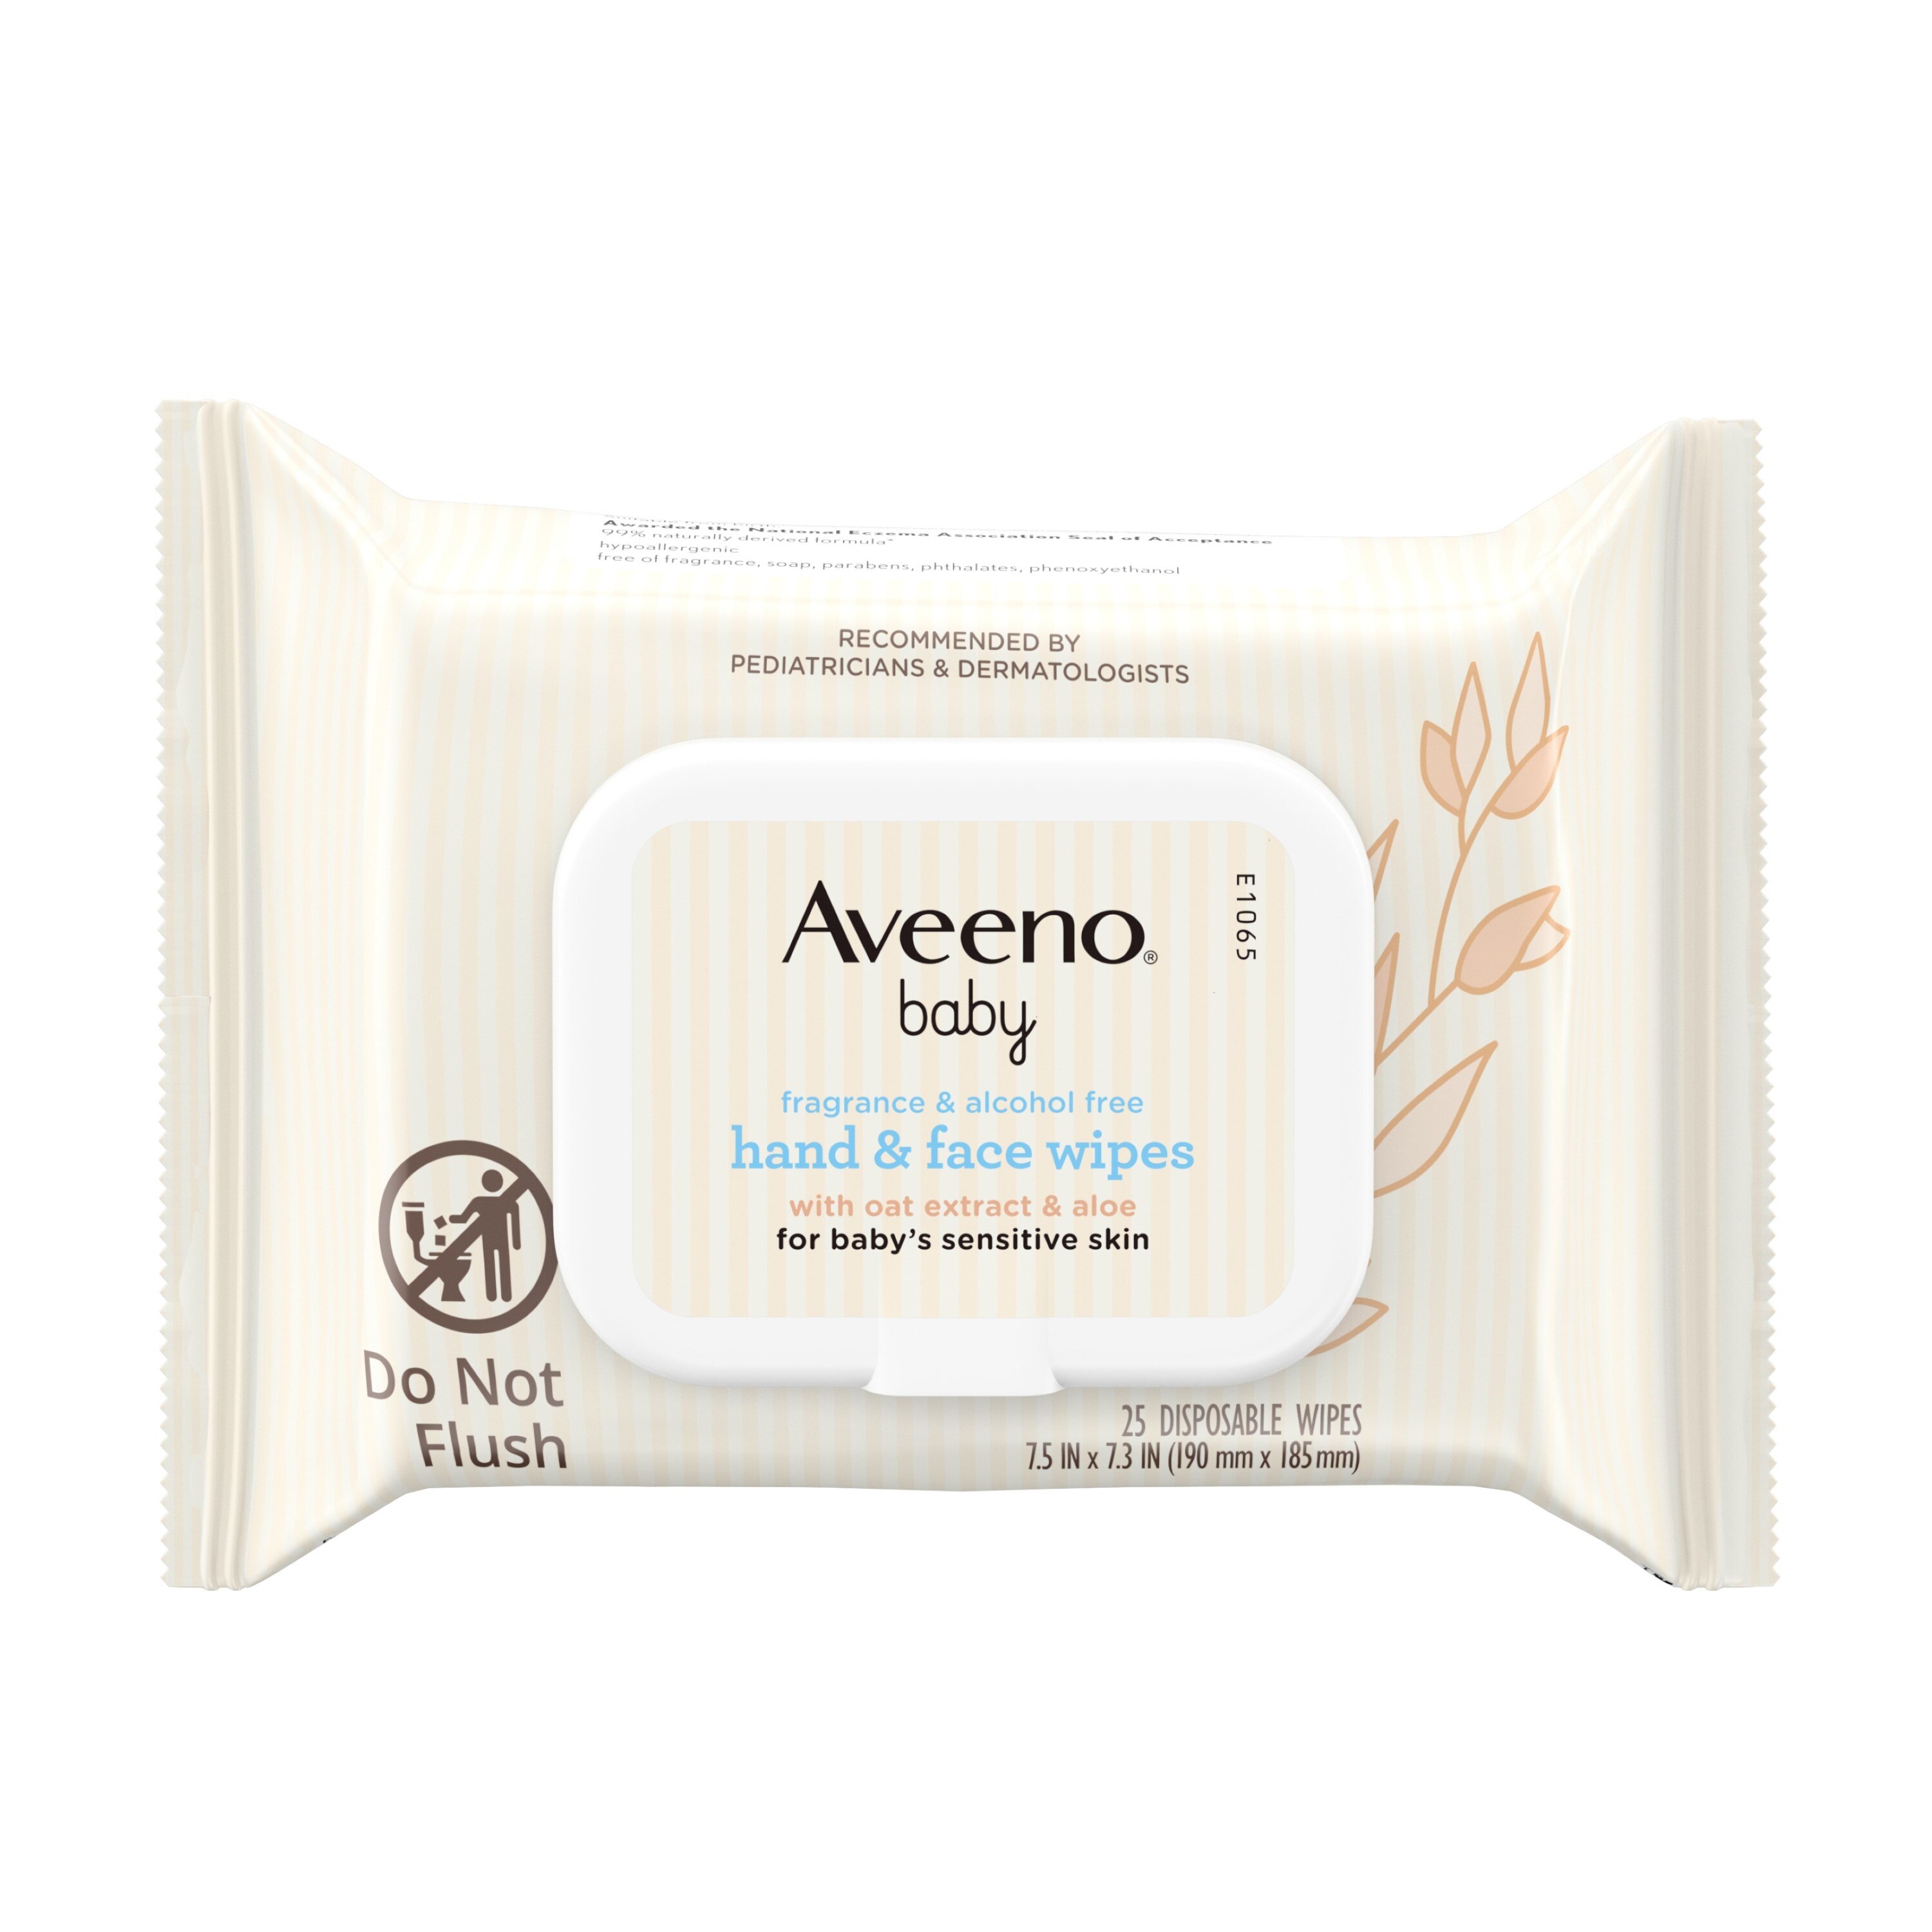 Aveeno Baby Hand & Face Cleansing Wipes with Oat Extract, 25 CT